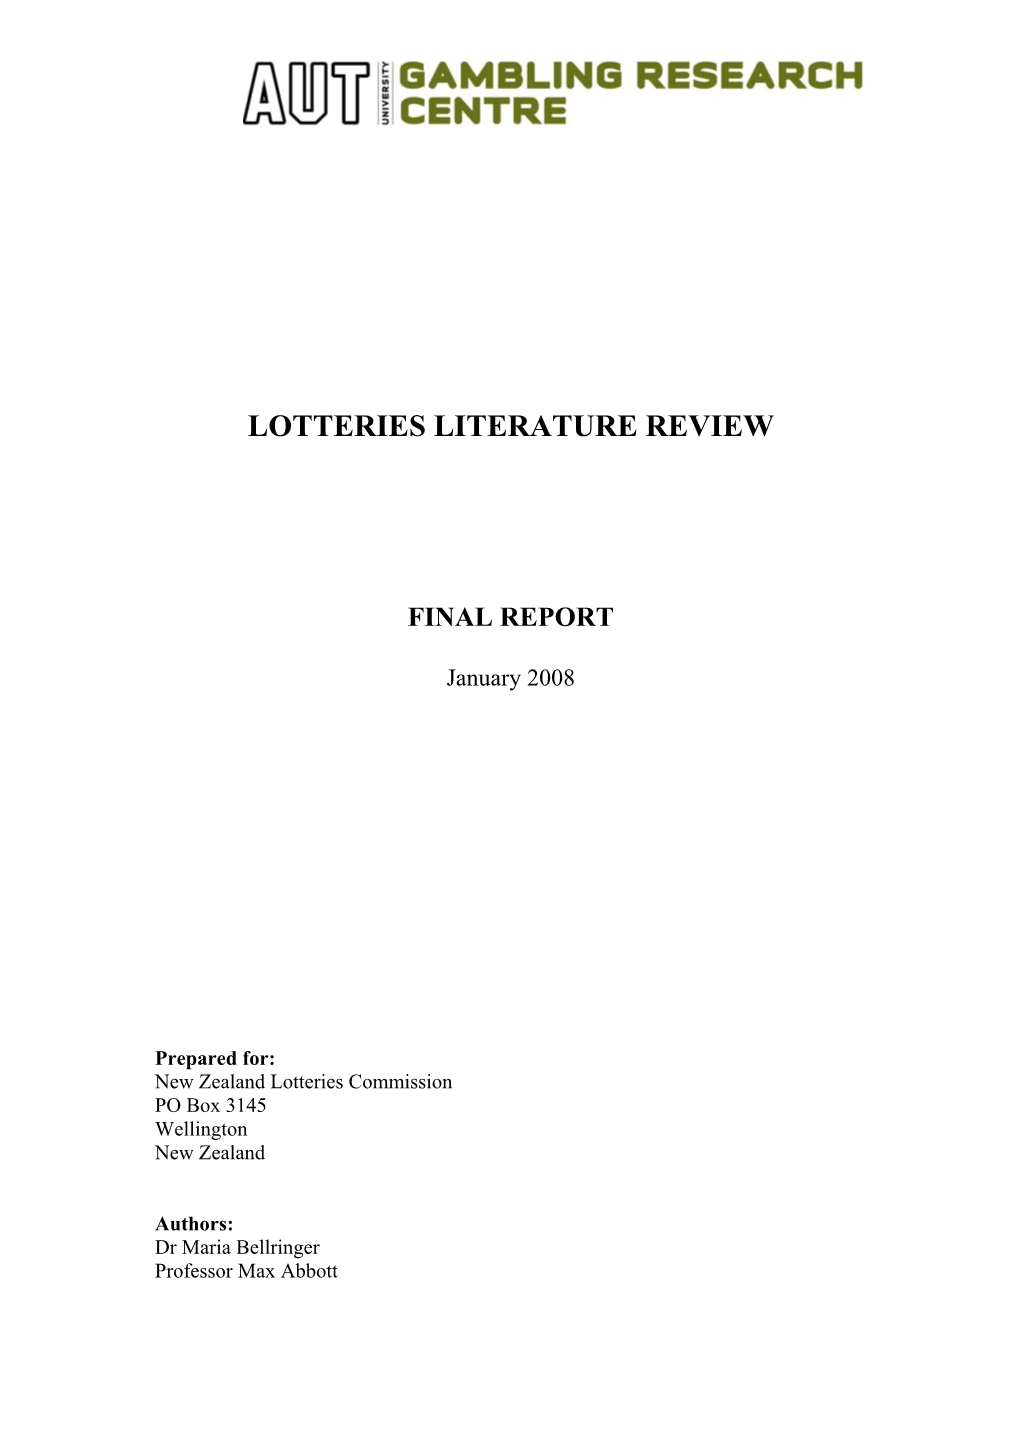 Lotteries Literature Review